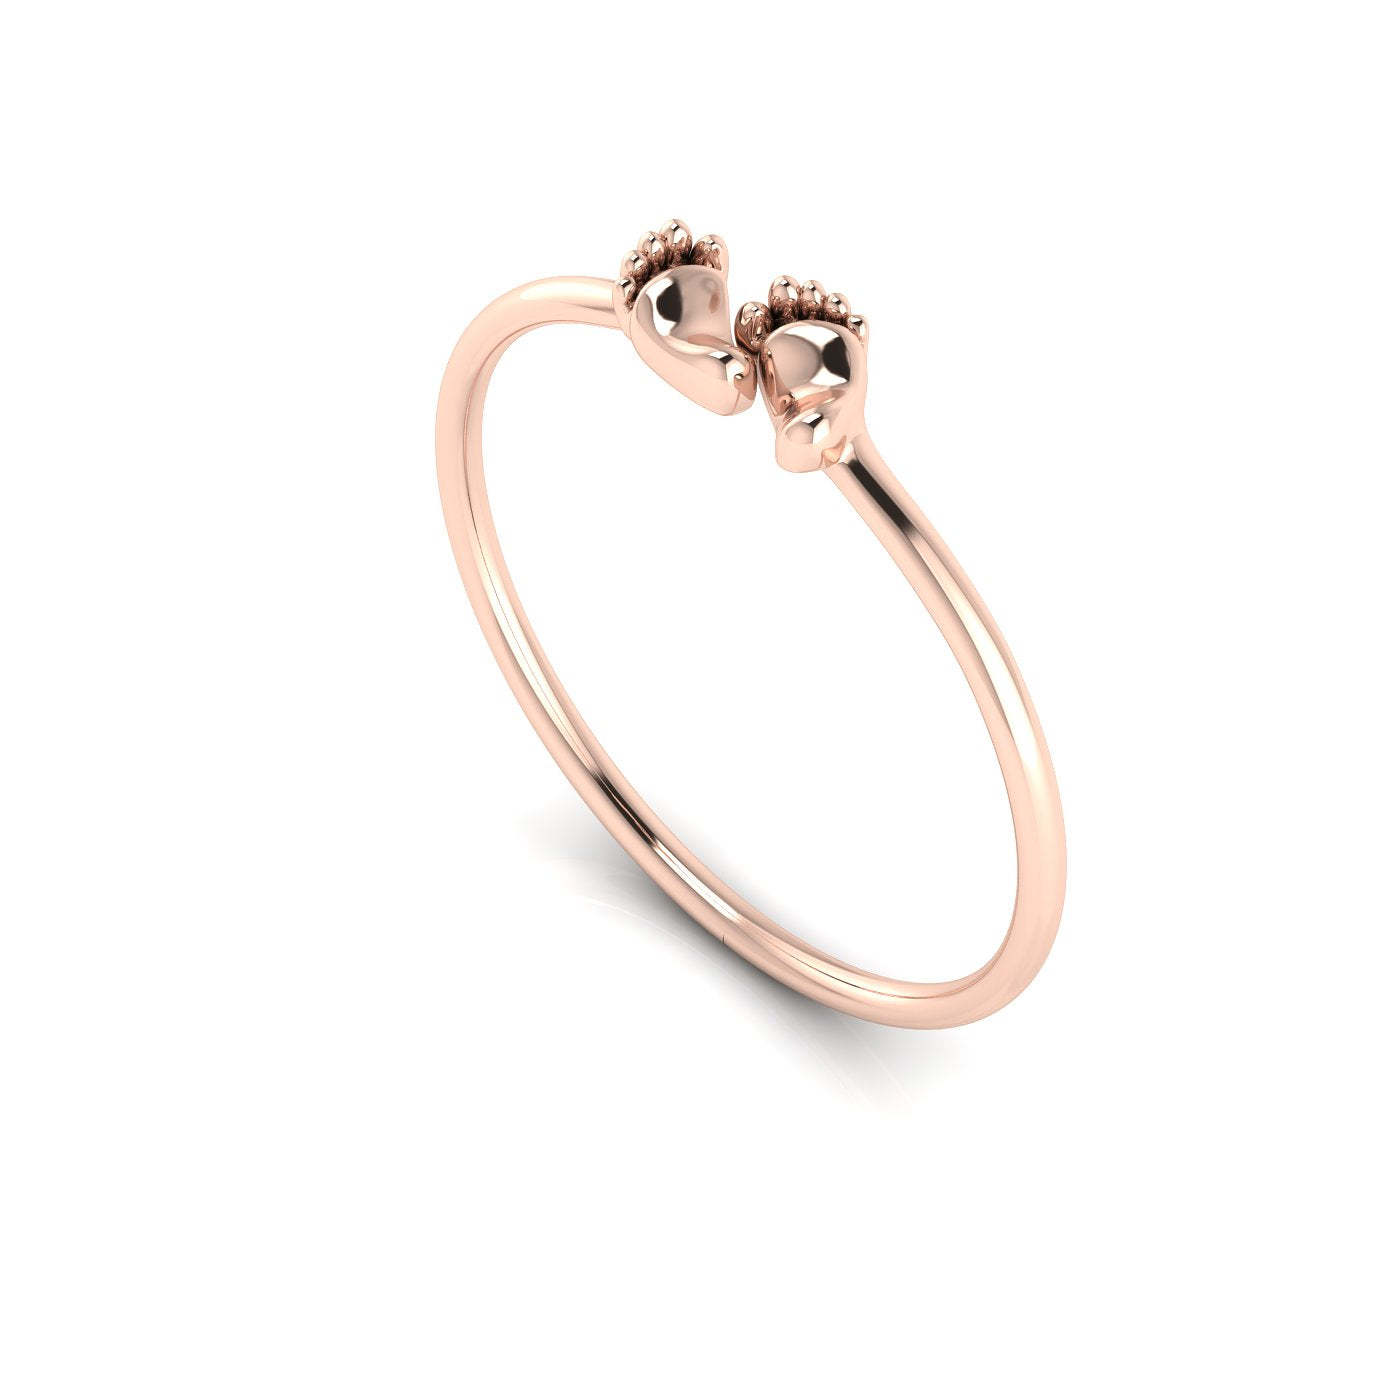 Pour La Vie - 18K Rose Gold Plated Silver Roof of Life Bangle